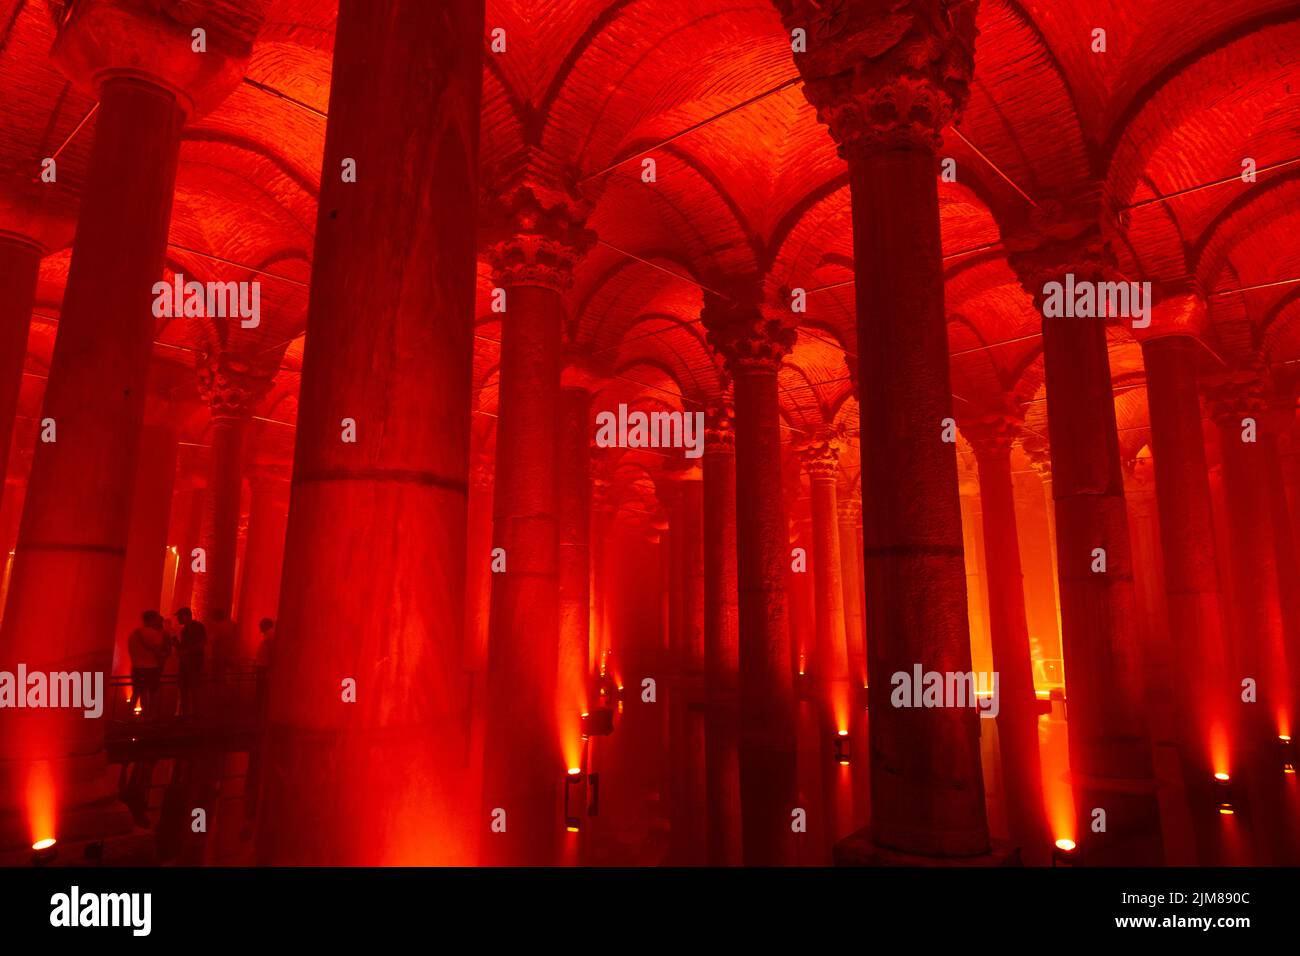 The Basilica Cistern or Yerebatan Sarnici with red ambient lights. Landmarks of Istanbul background photo. Noise and grain included. Selective focus. Stock Photo